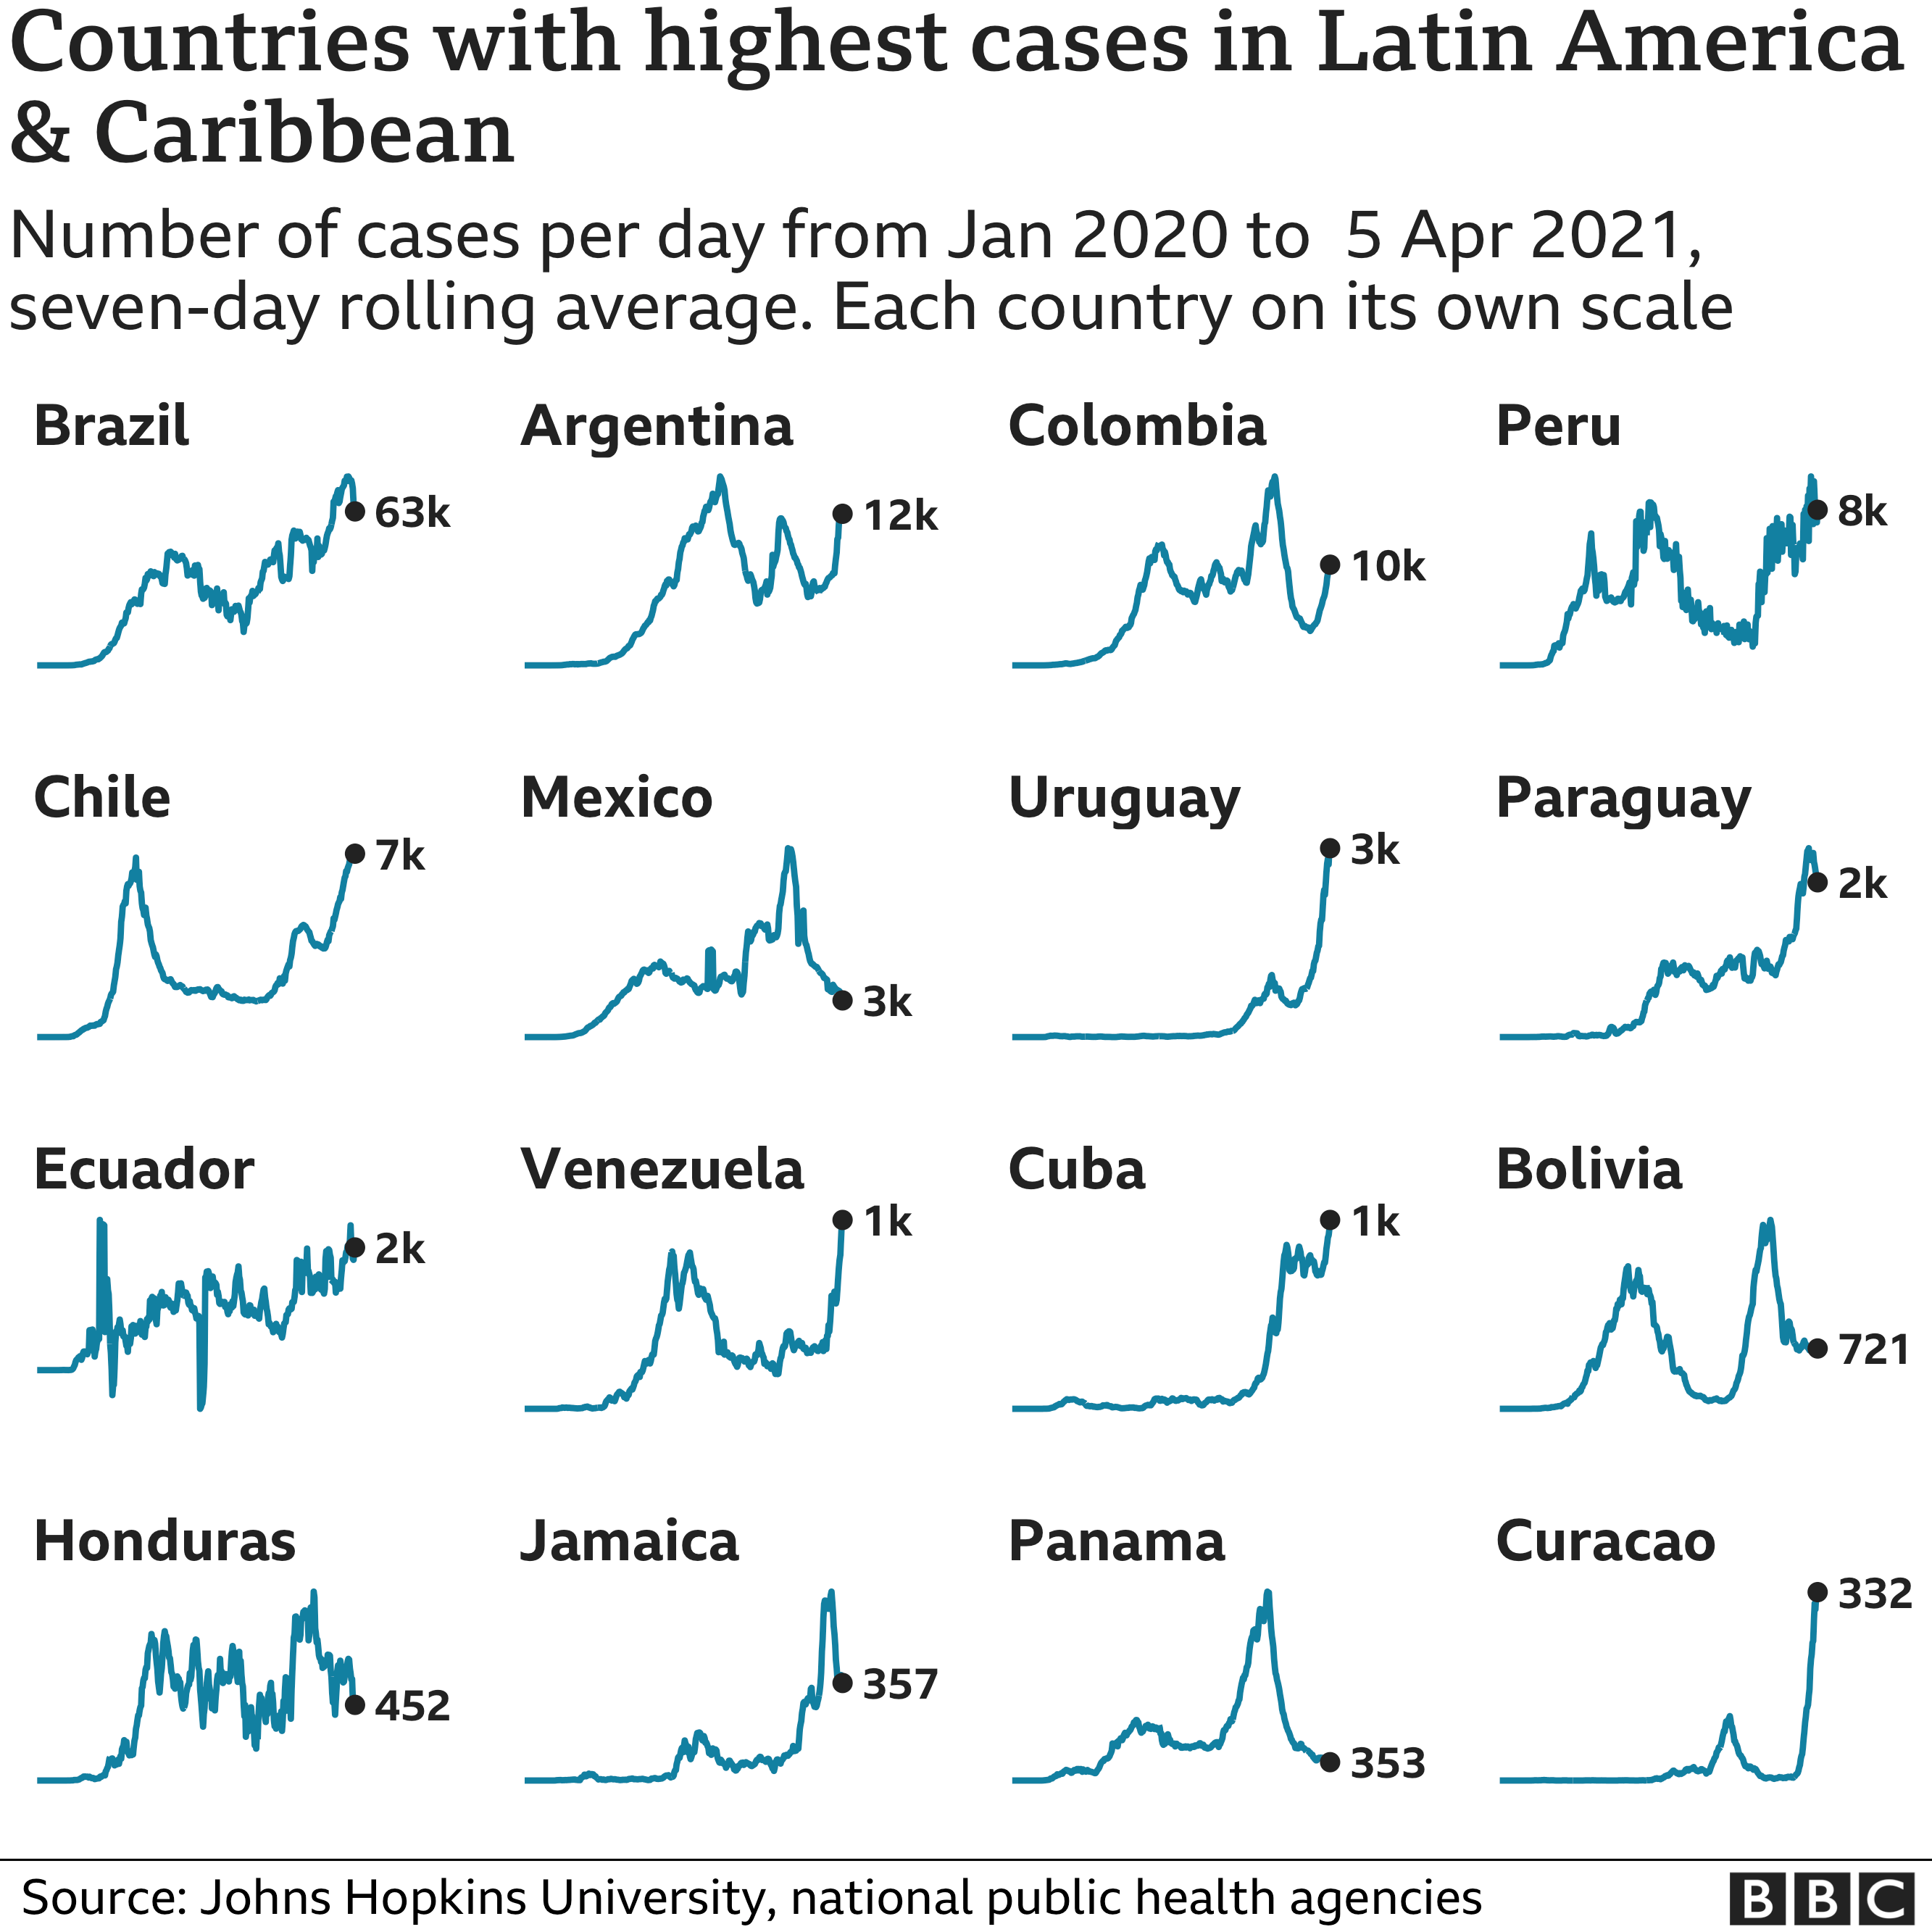 Countries with highest cases in Latin America and Caribbean 5-4-2021 - enlarge